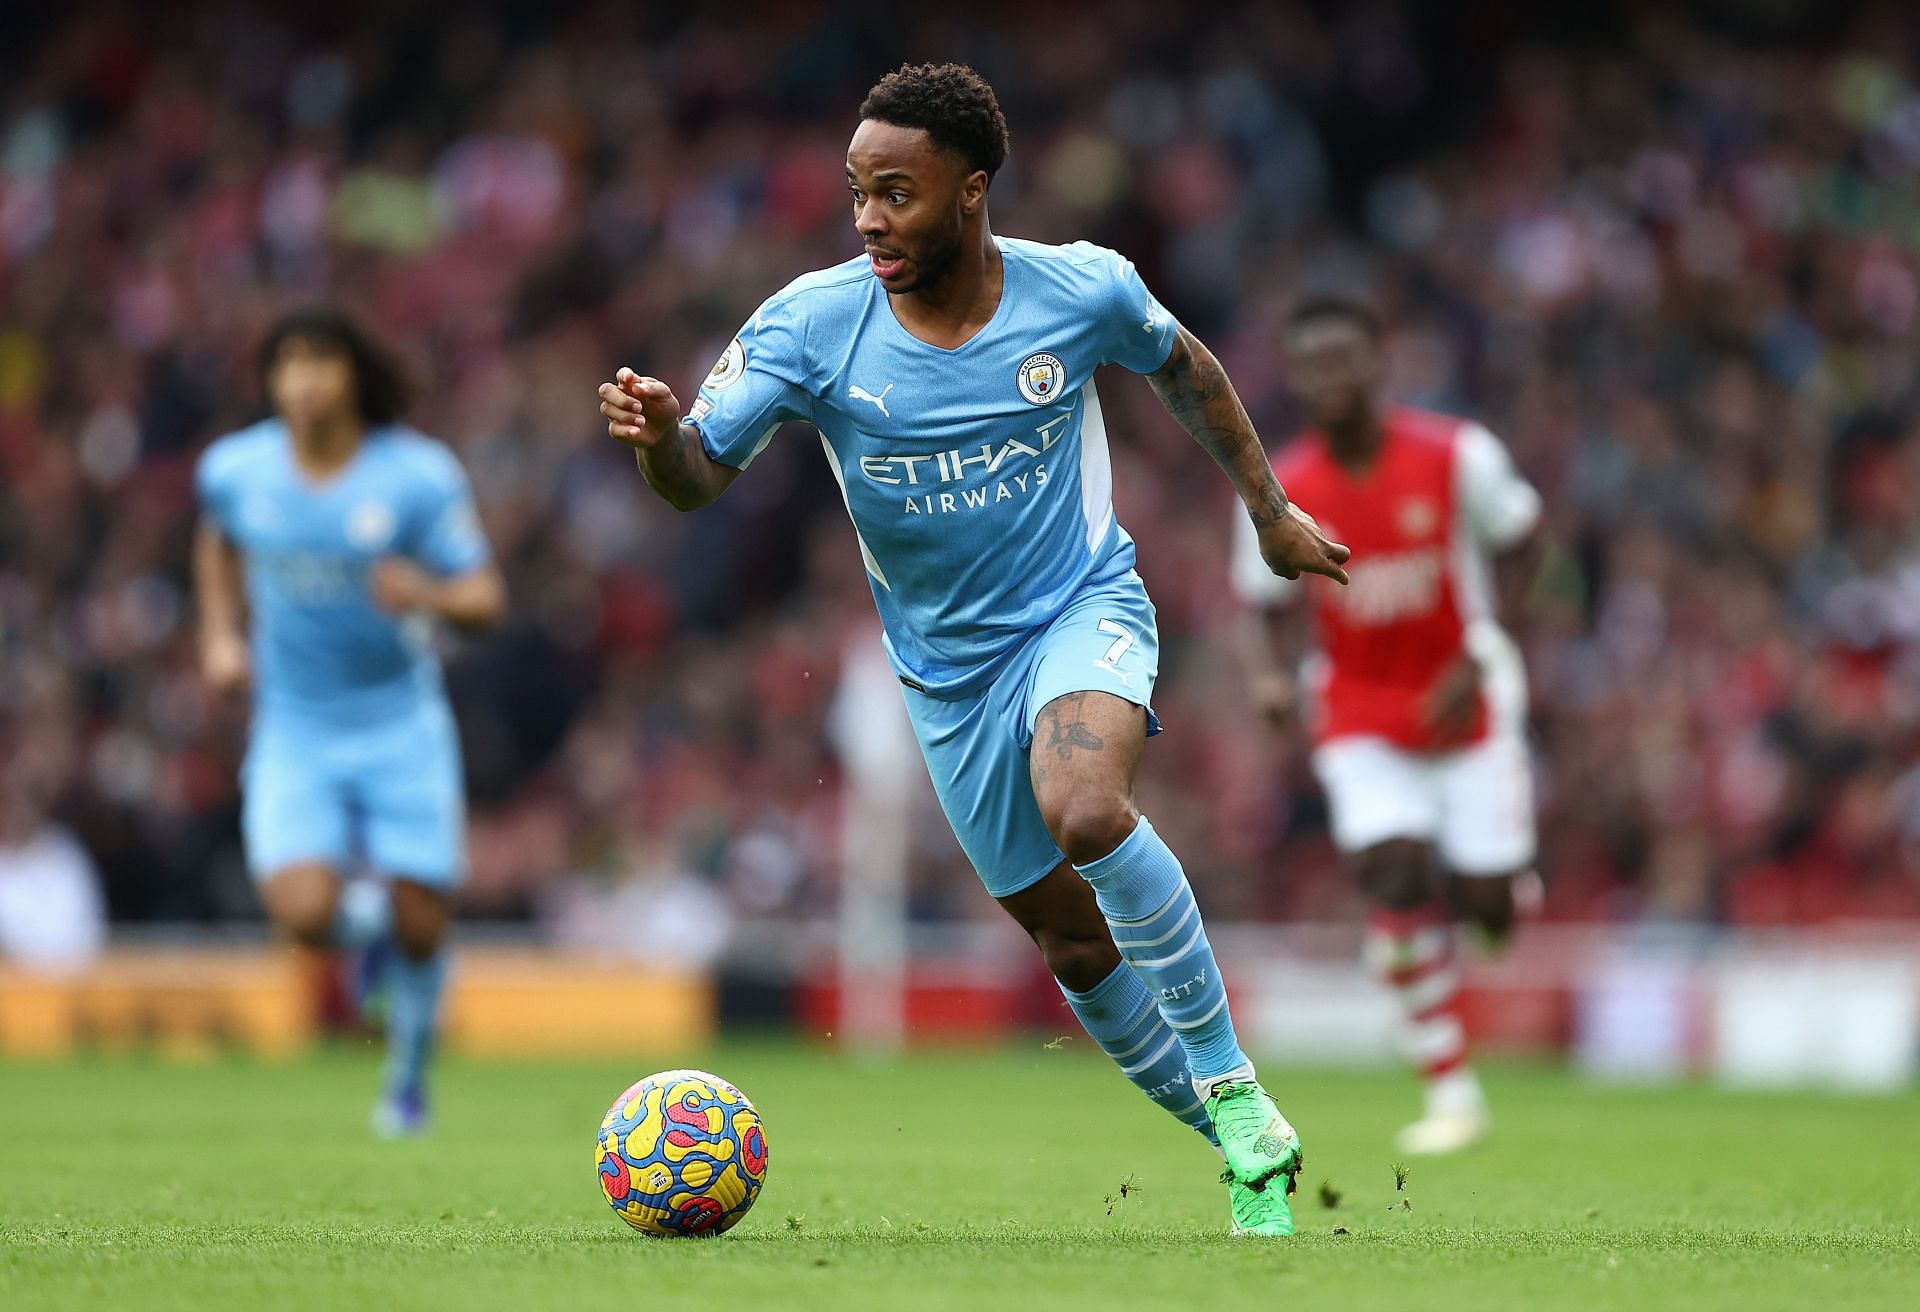 Raheem Sterling has reached double-digit figures in goals for the last five seasons